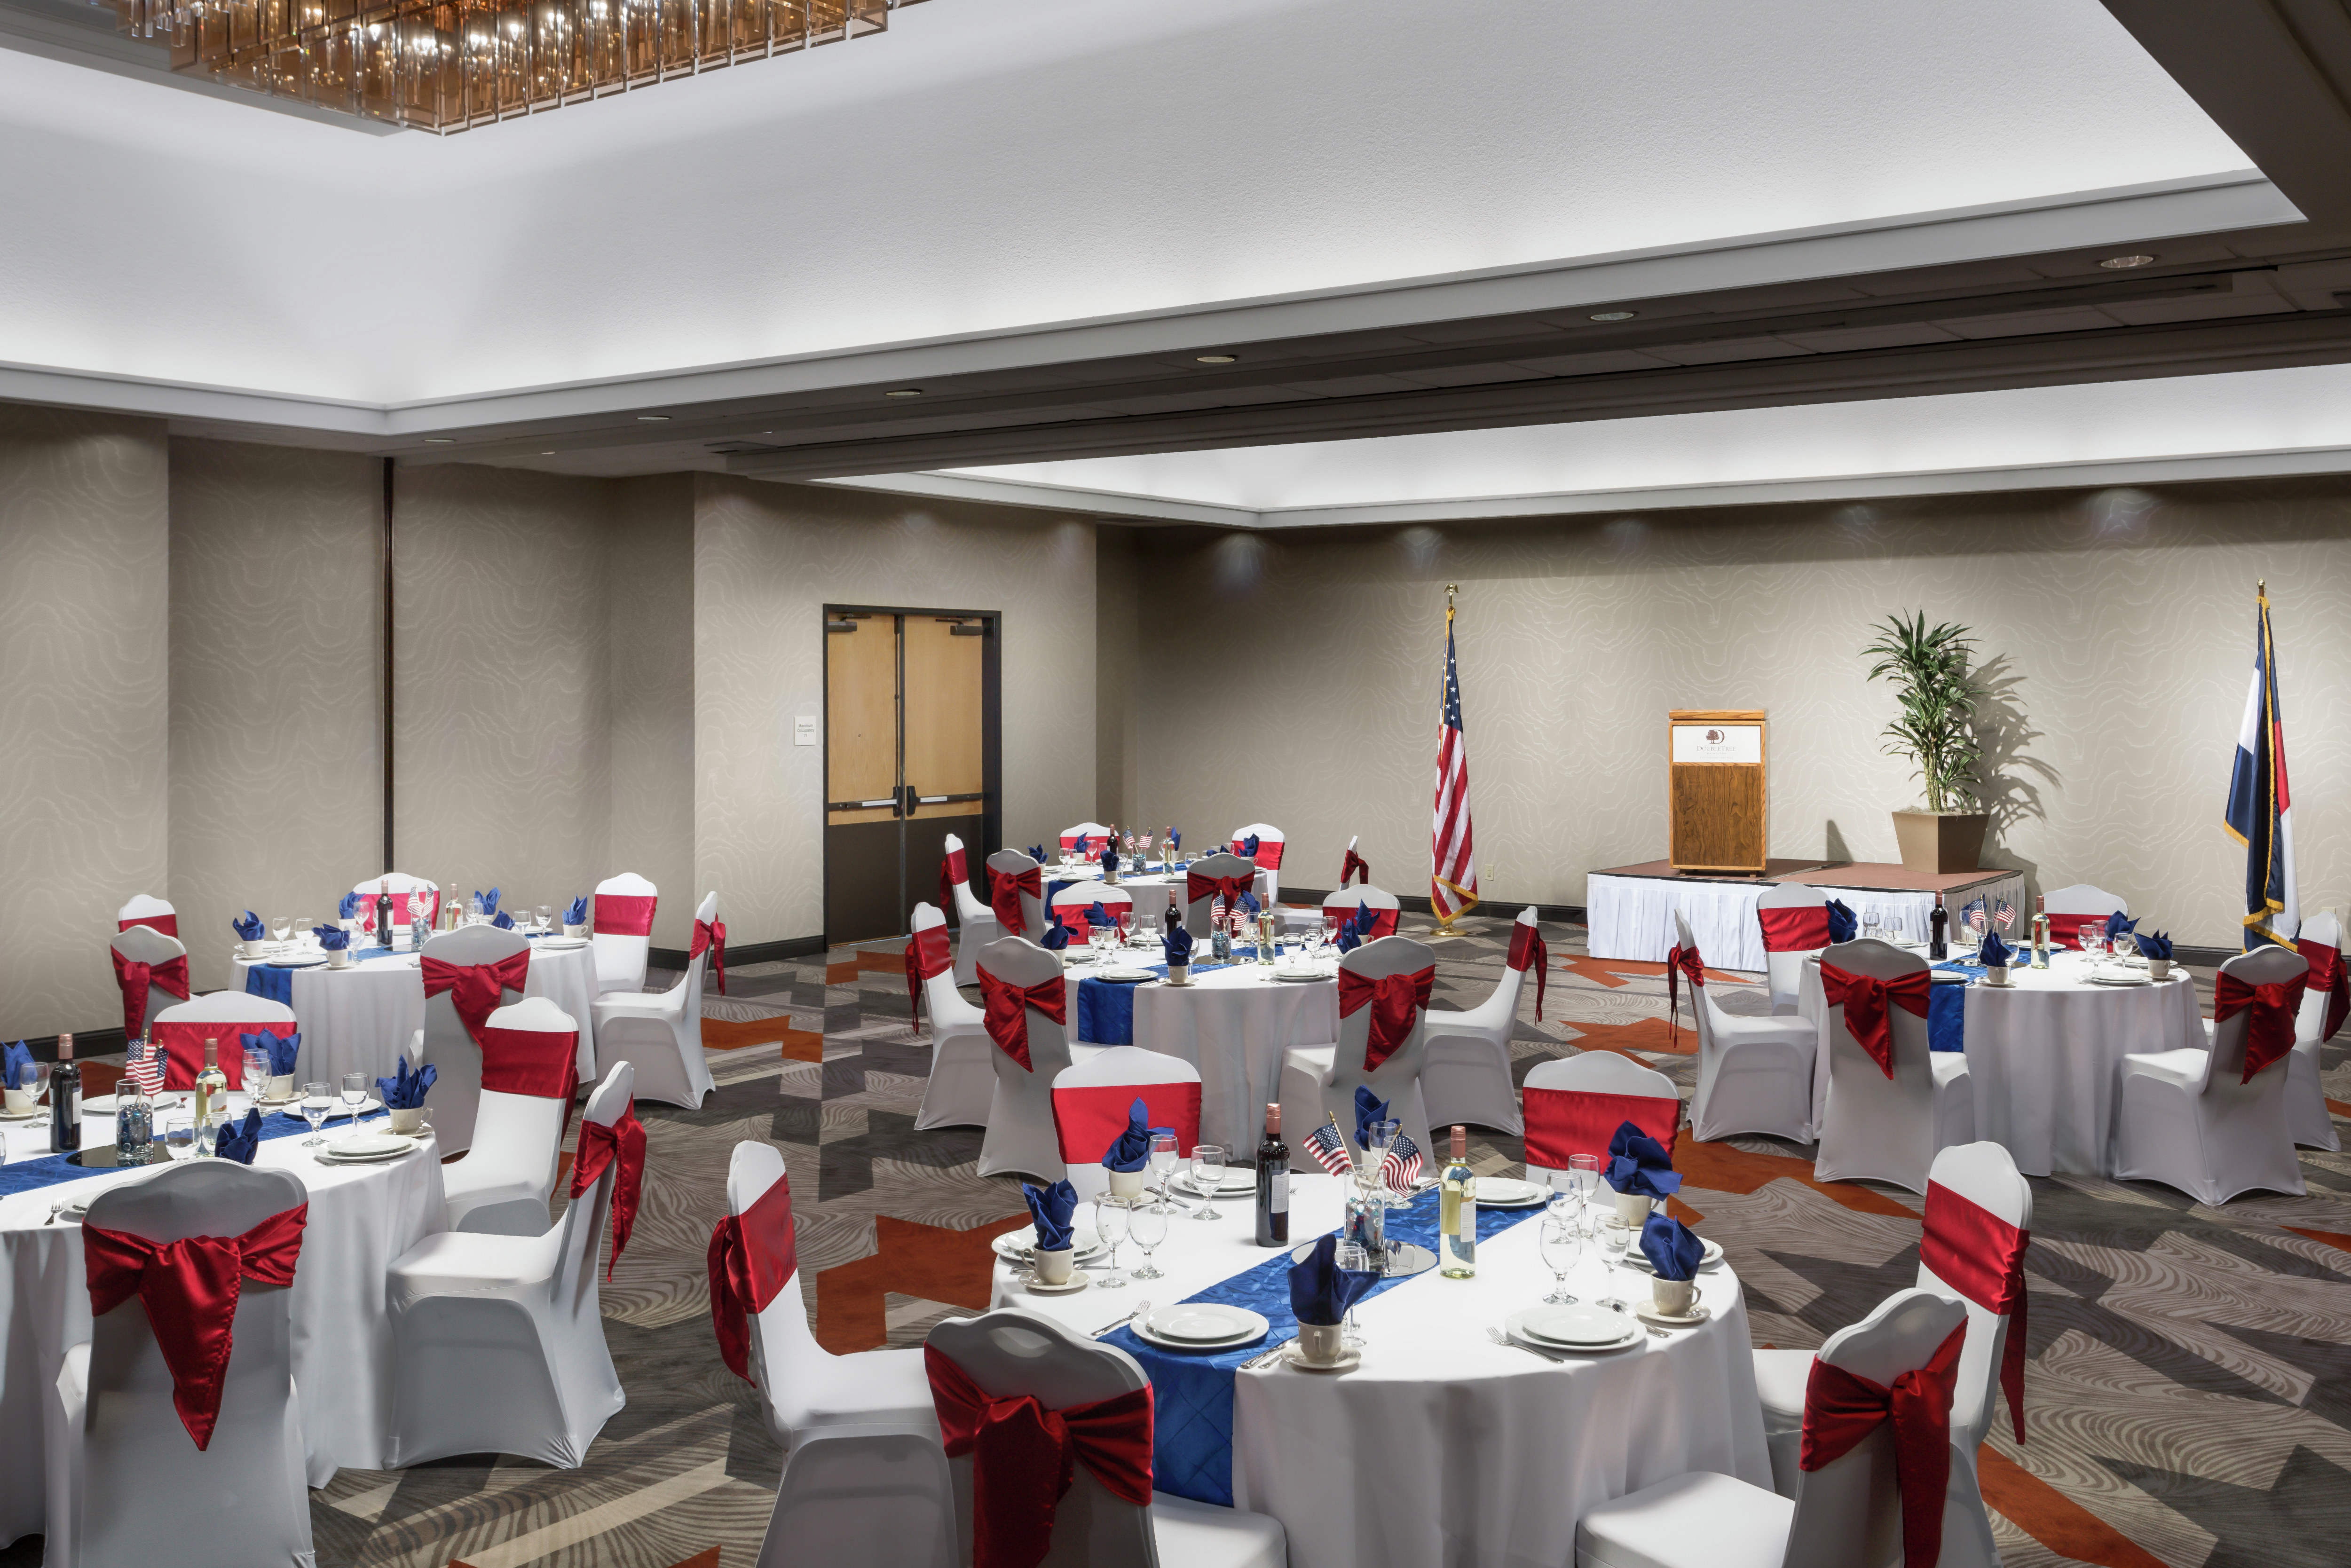 Hotel Ballroom with Decorative Tables